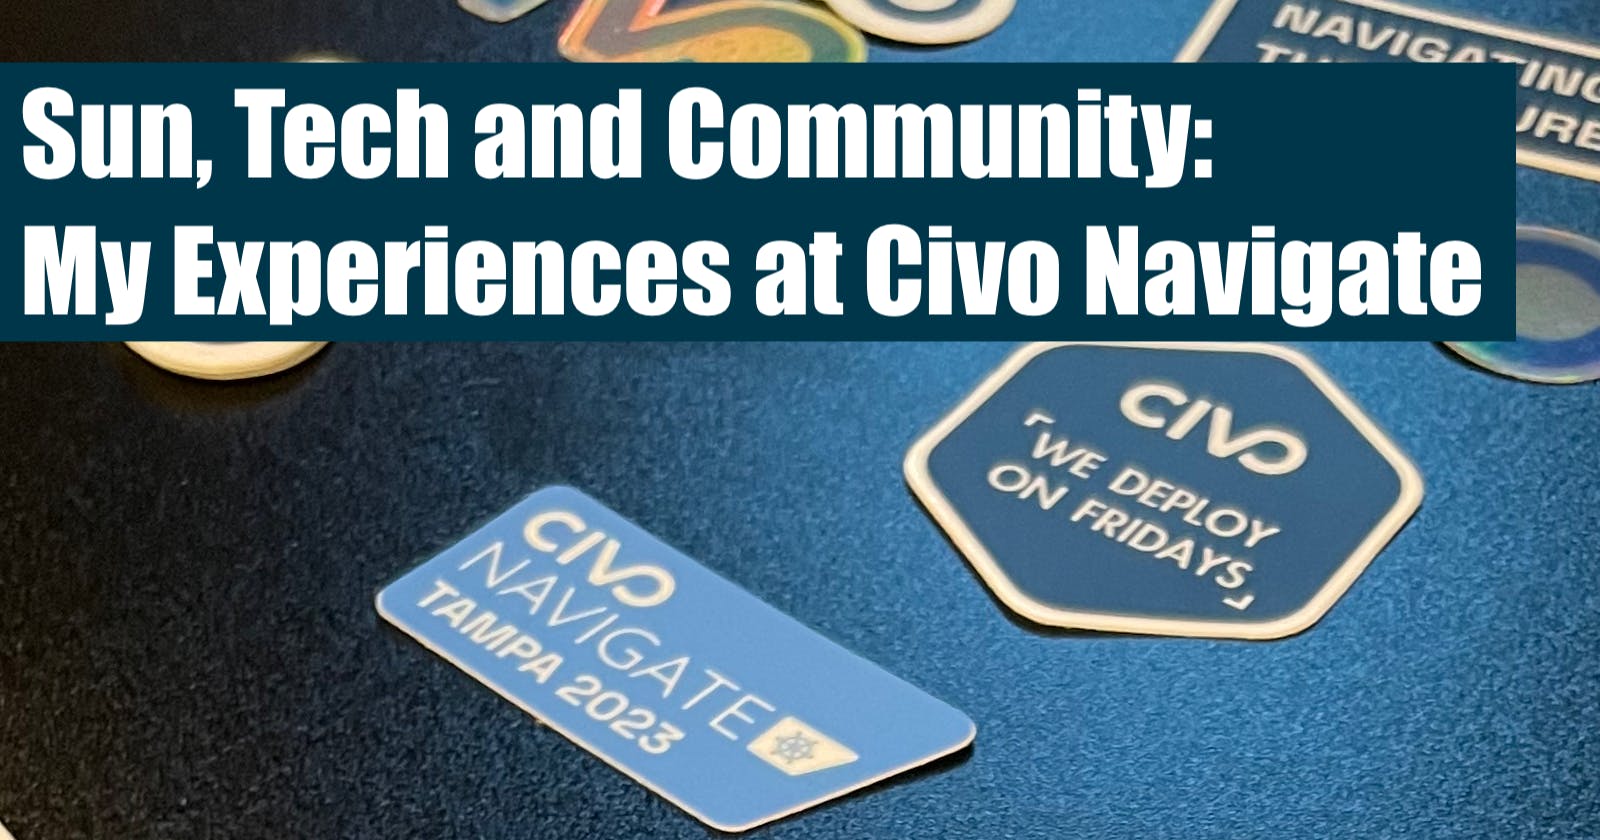 Sun, Tech and Community: My Experiences at Civo Navigate